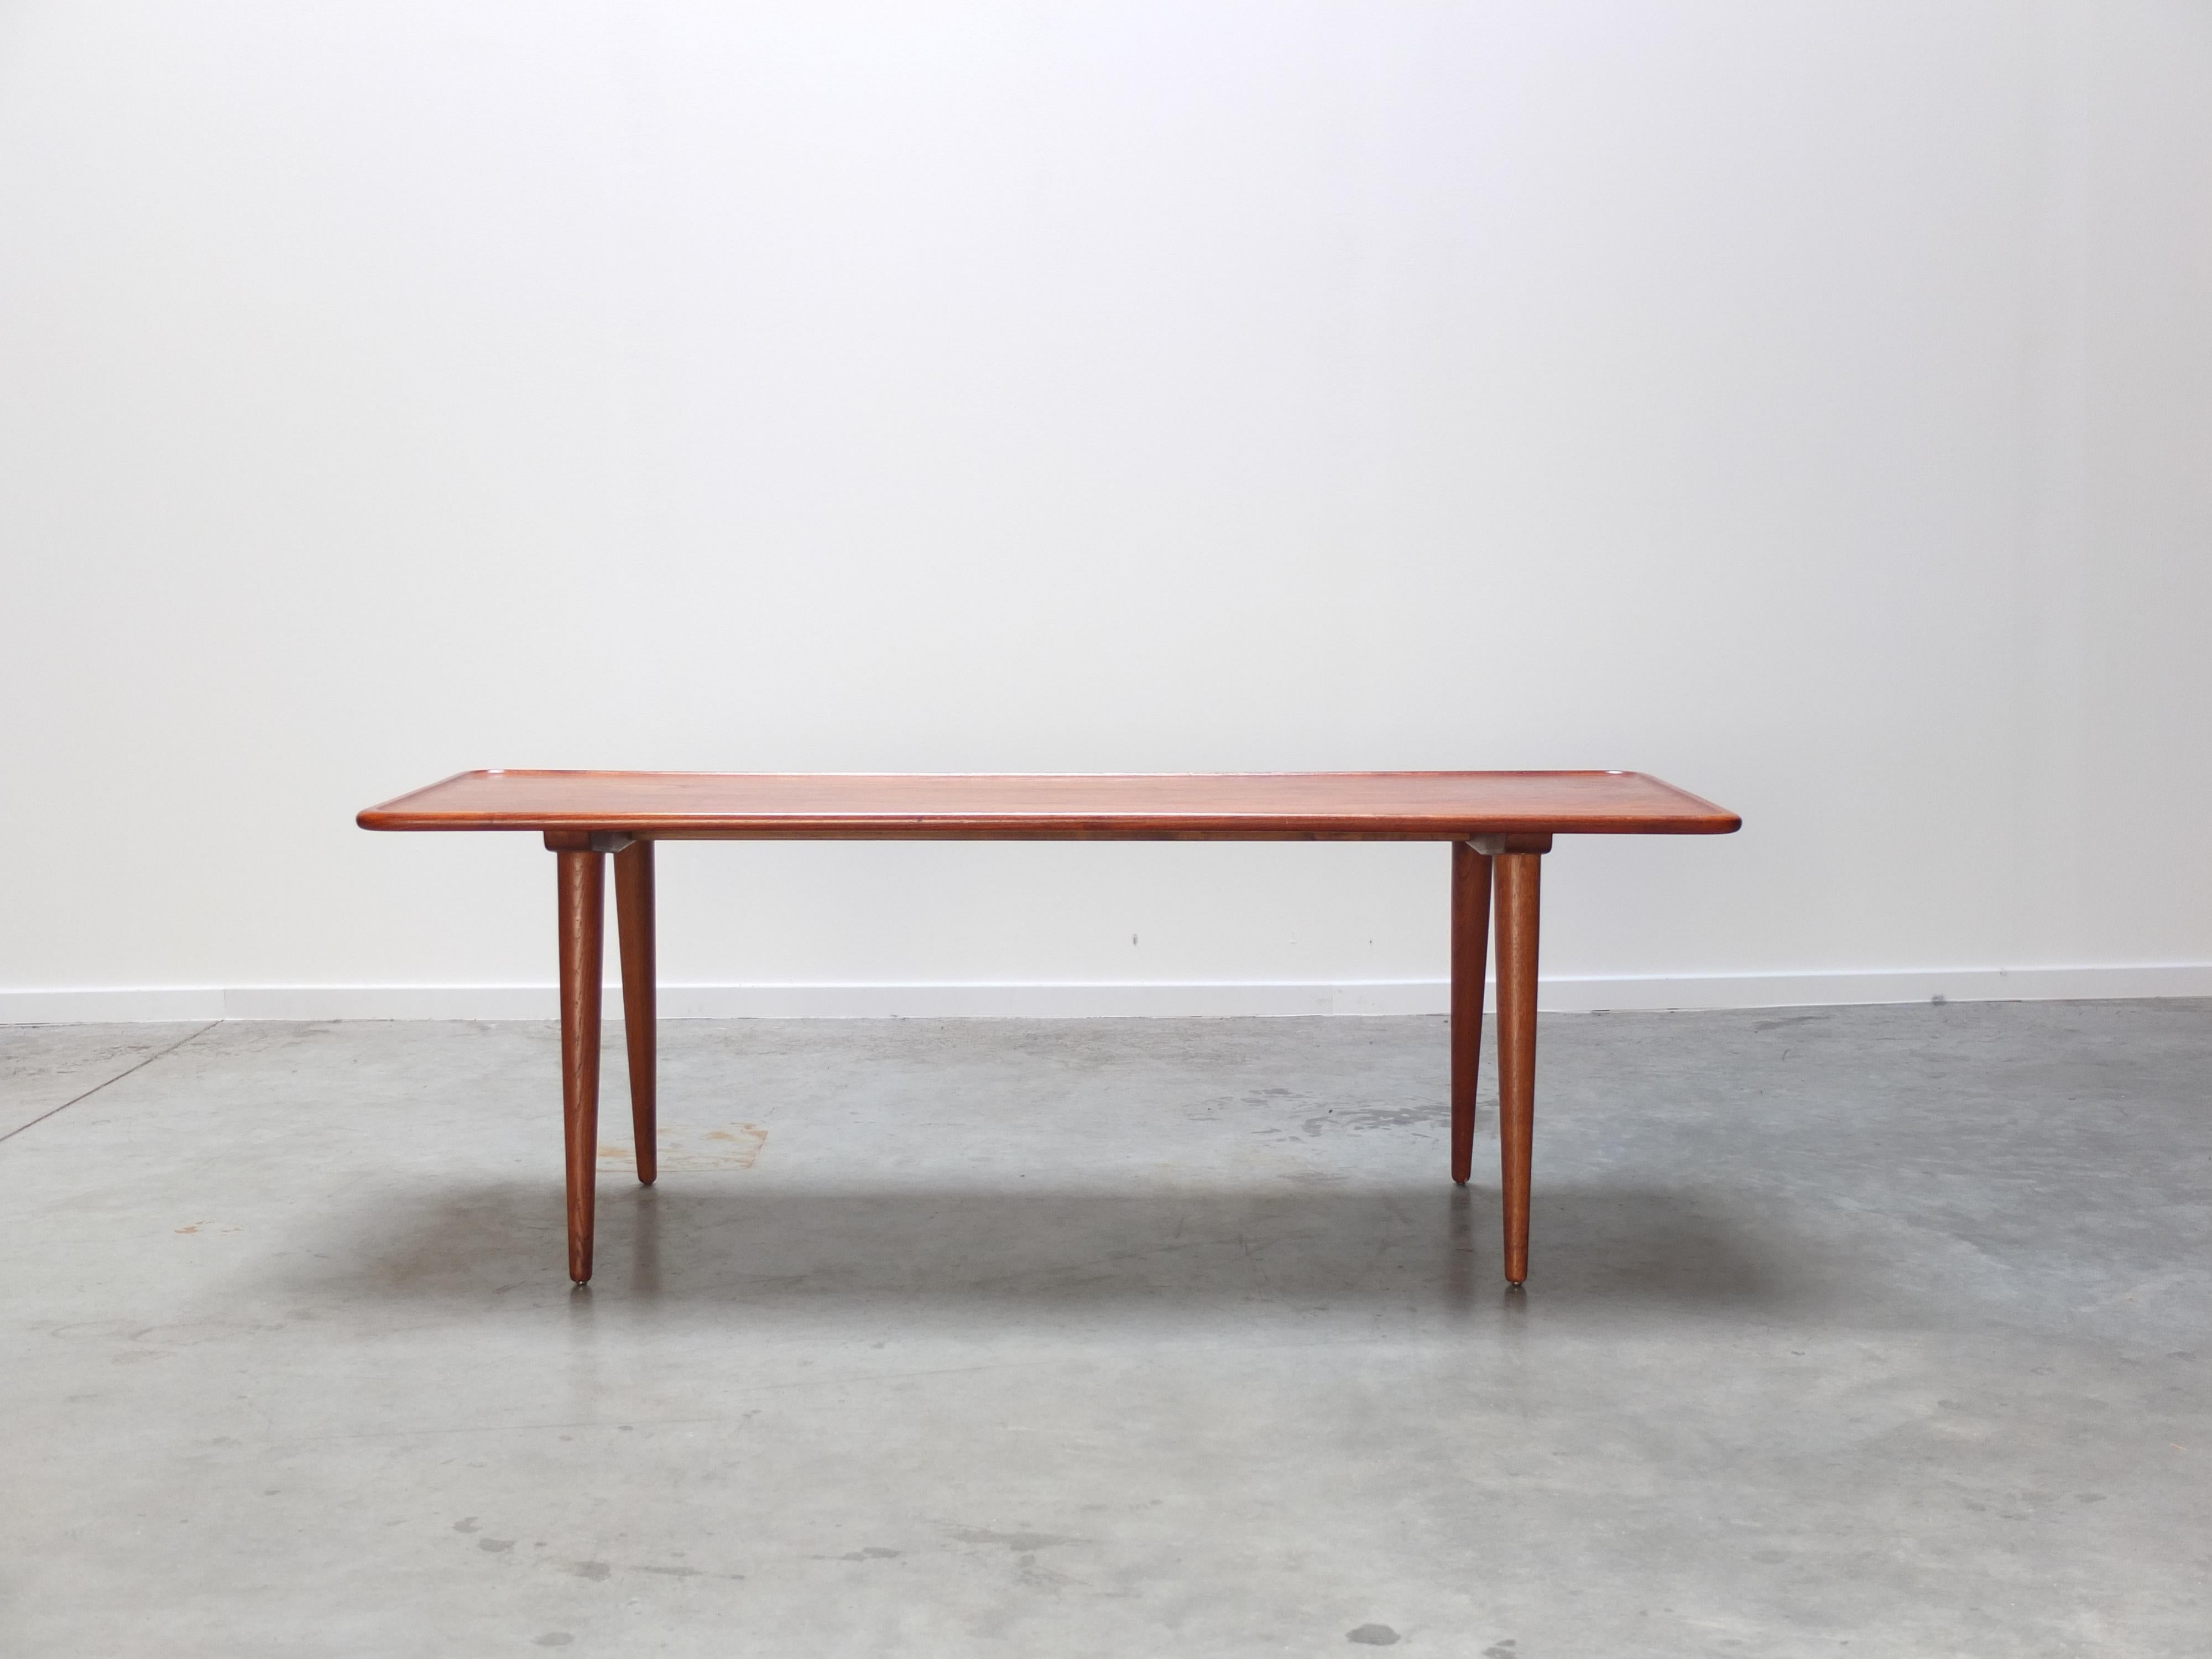 Lovely coffee table designed by Hans Wegner for Andreas Tuck in 1954. The top is made out of solid teak wood and stands and 4 oak tapering legs that spray at an angle. Great minimalist design with eye for detail such as the raised edge on the top.